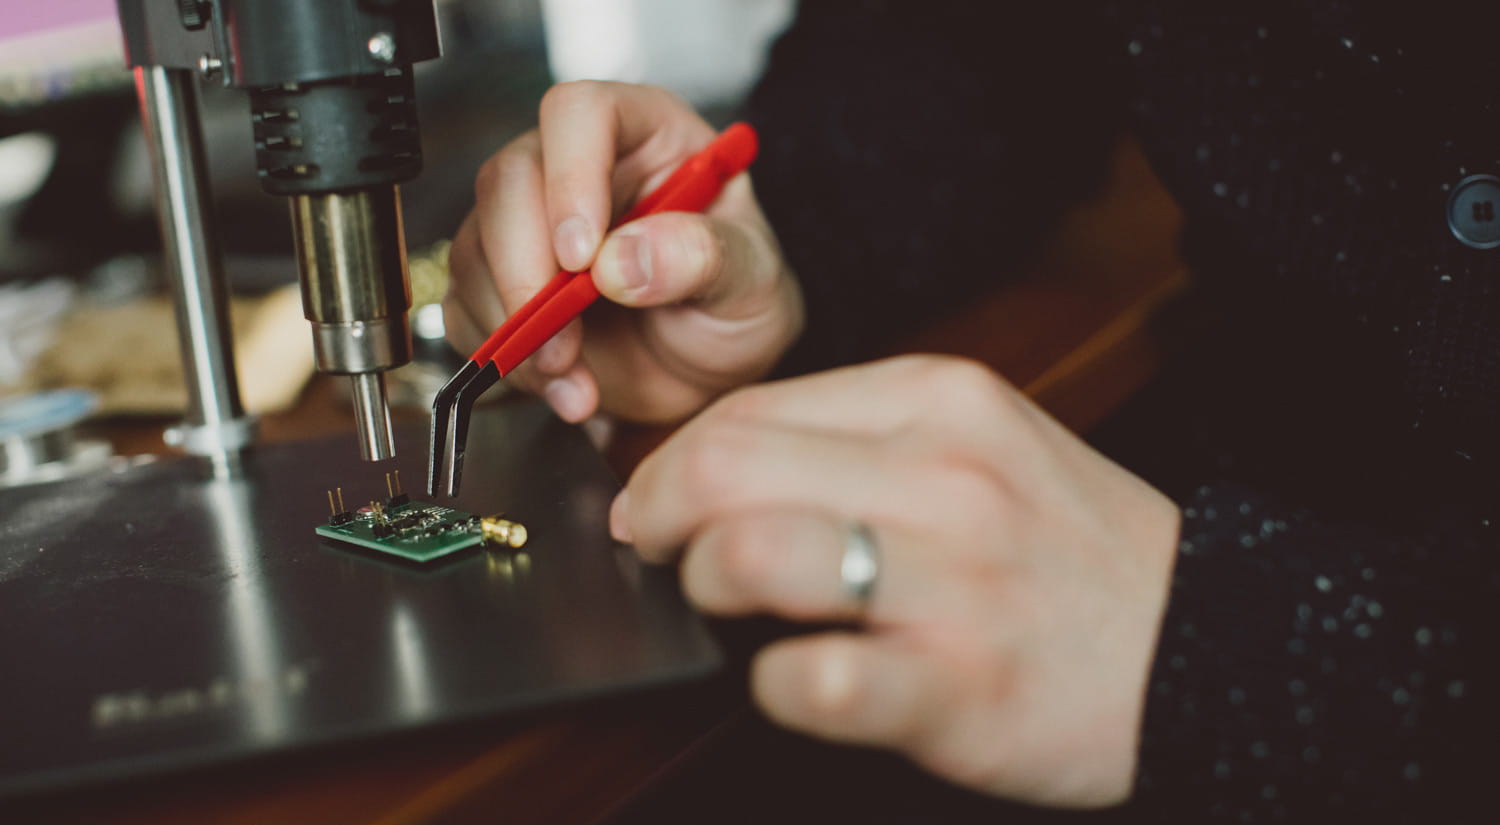 A close-up photo of a student working on a microchip under a microscope